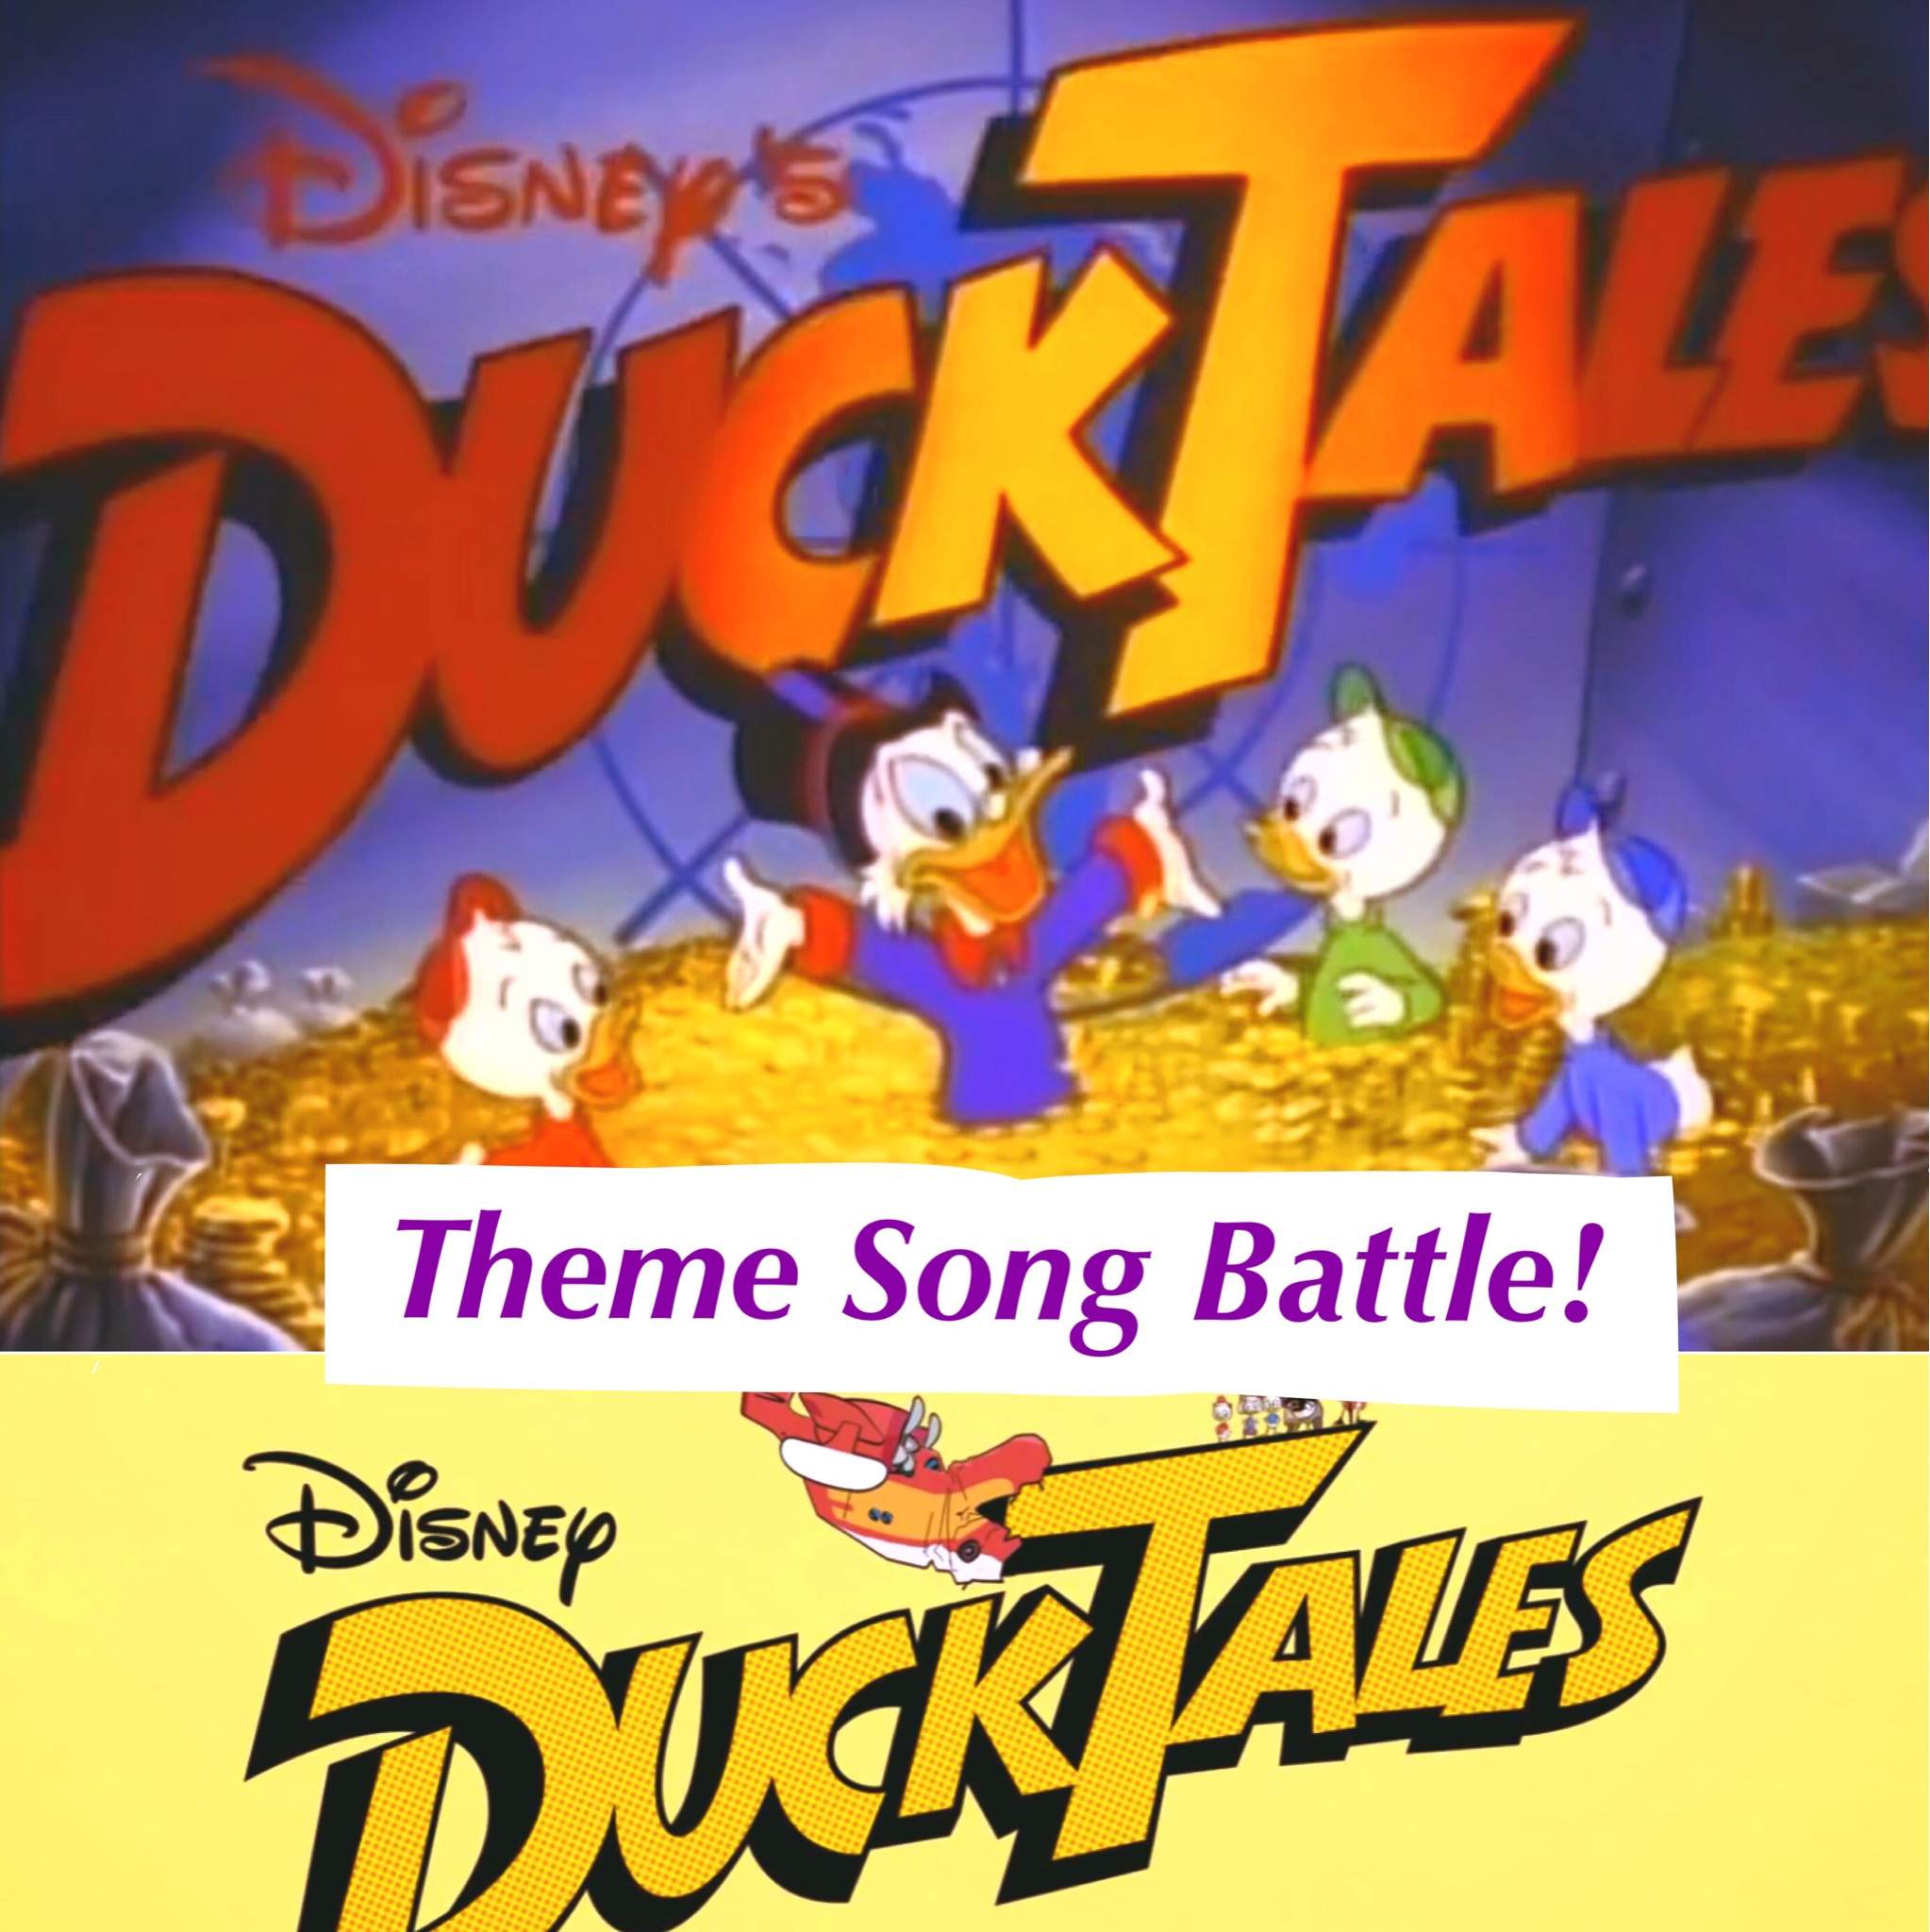 who sings the new ducktales theme song